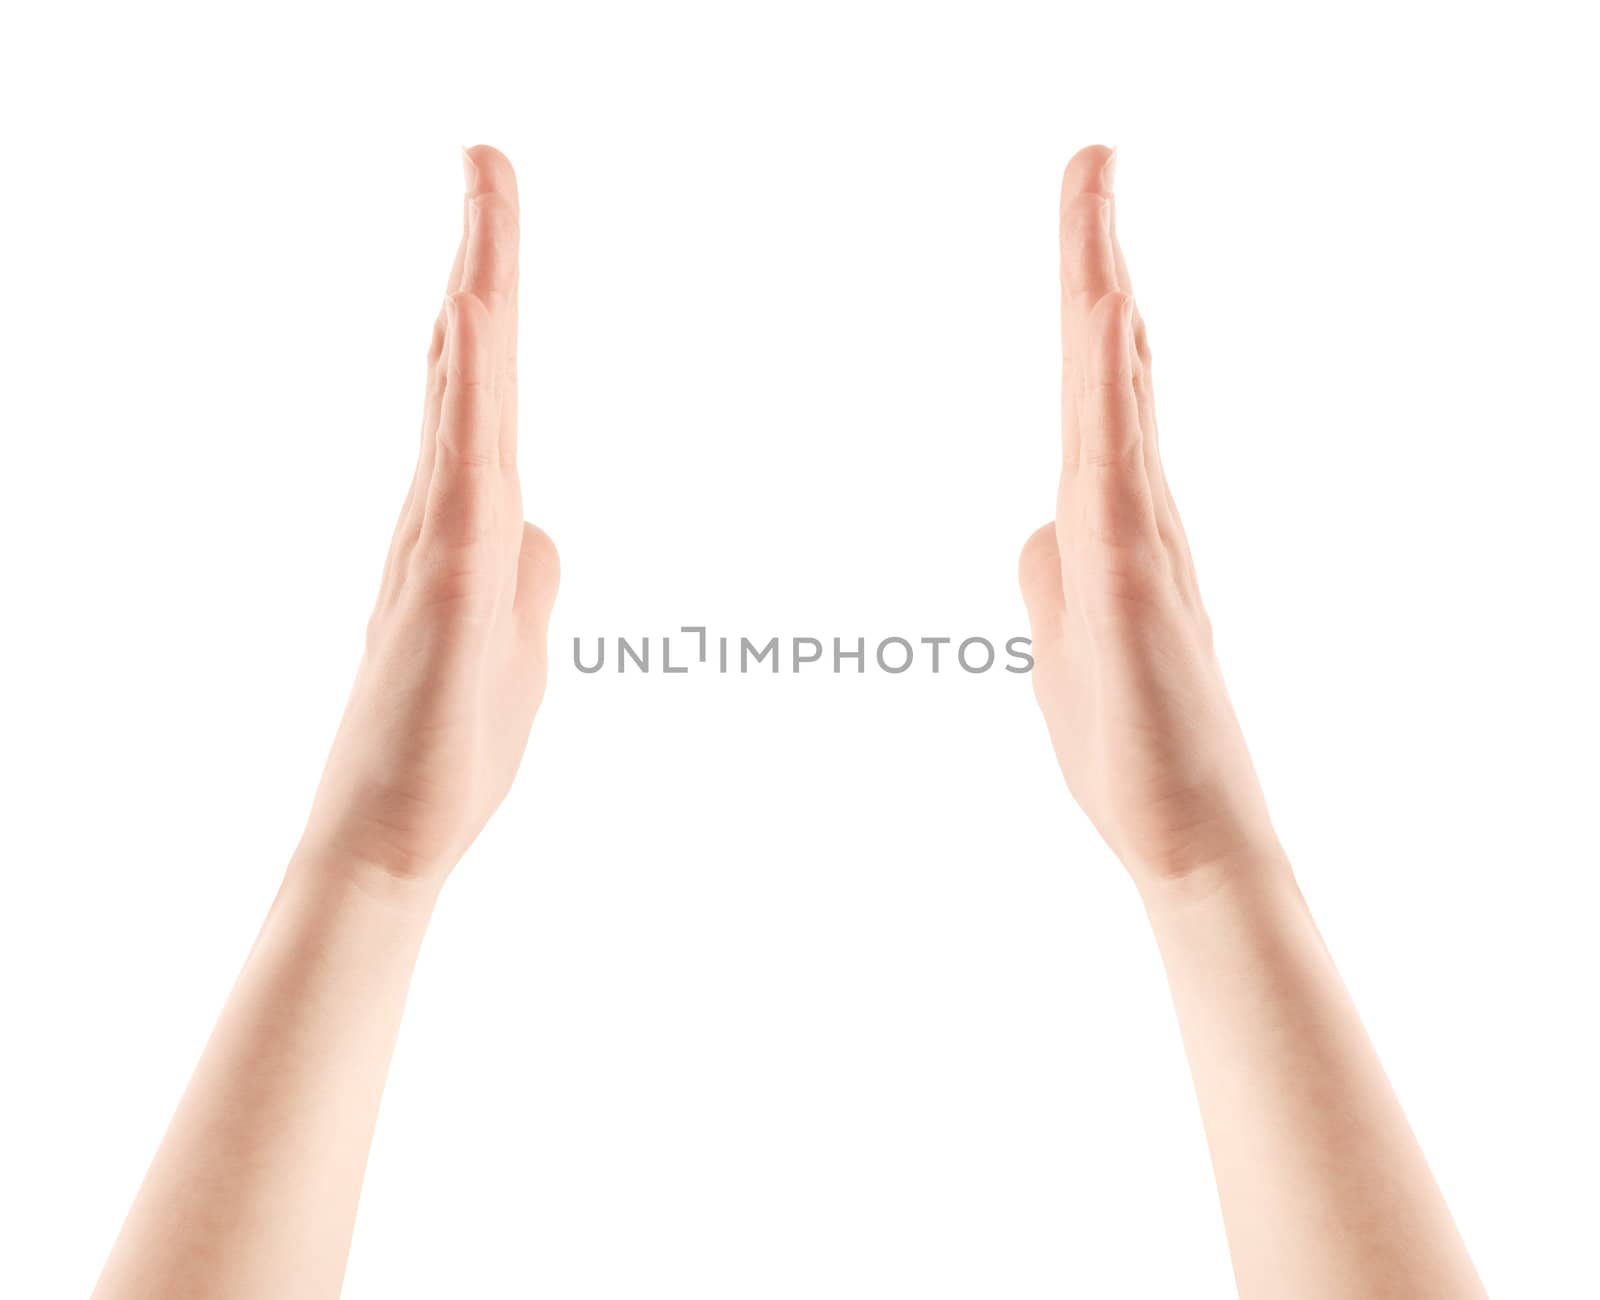 Showing hands isolated on white.